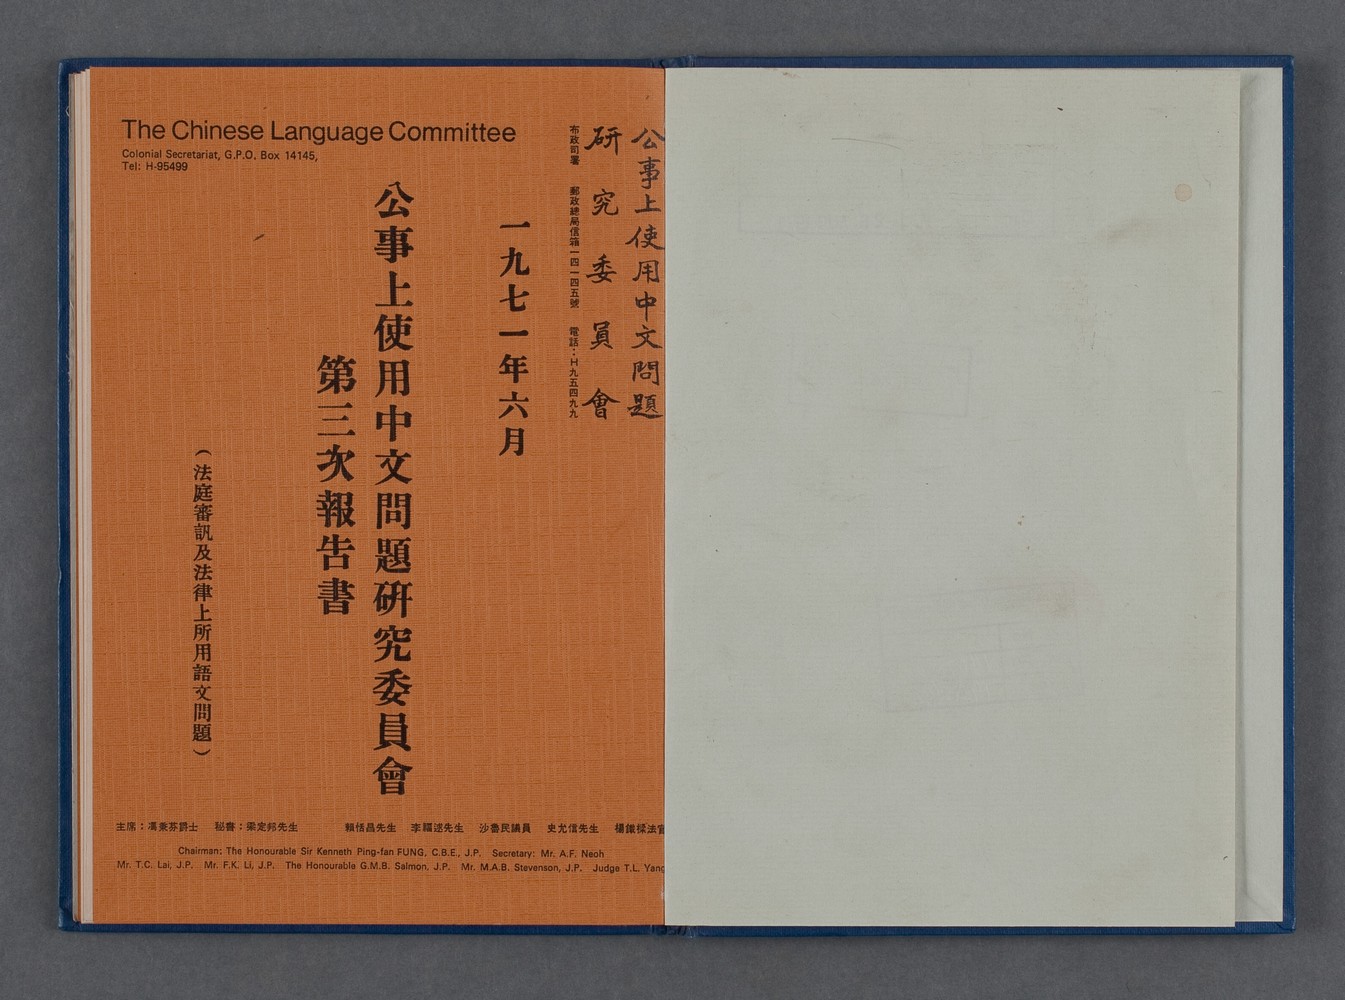 1970 Bulletin No. 5, The Scout Association Hong Kong Branch by